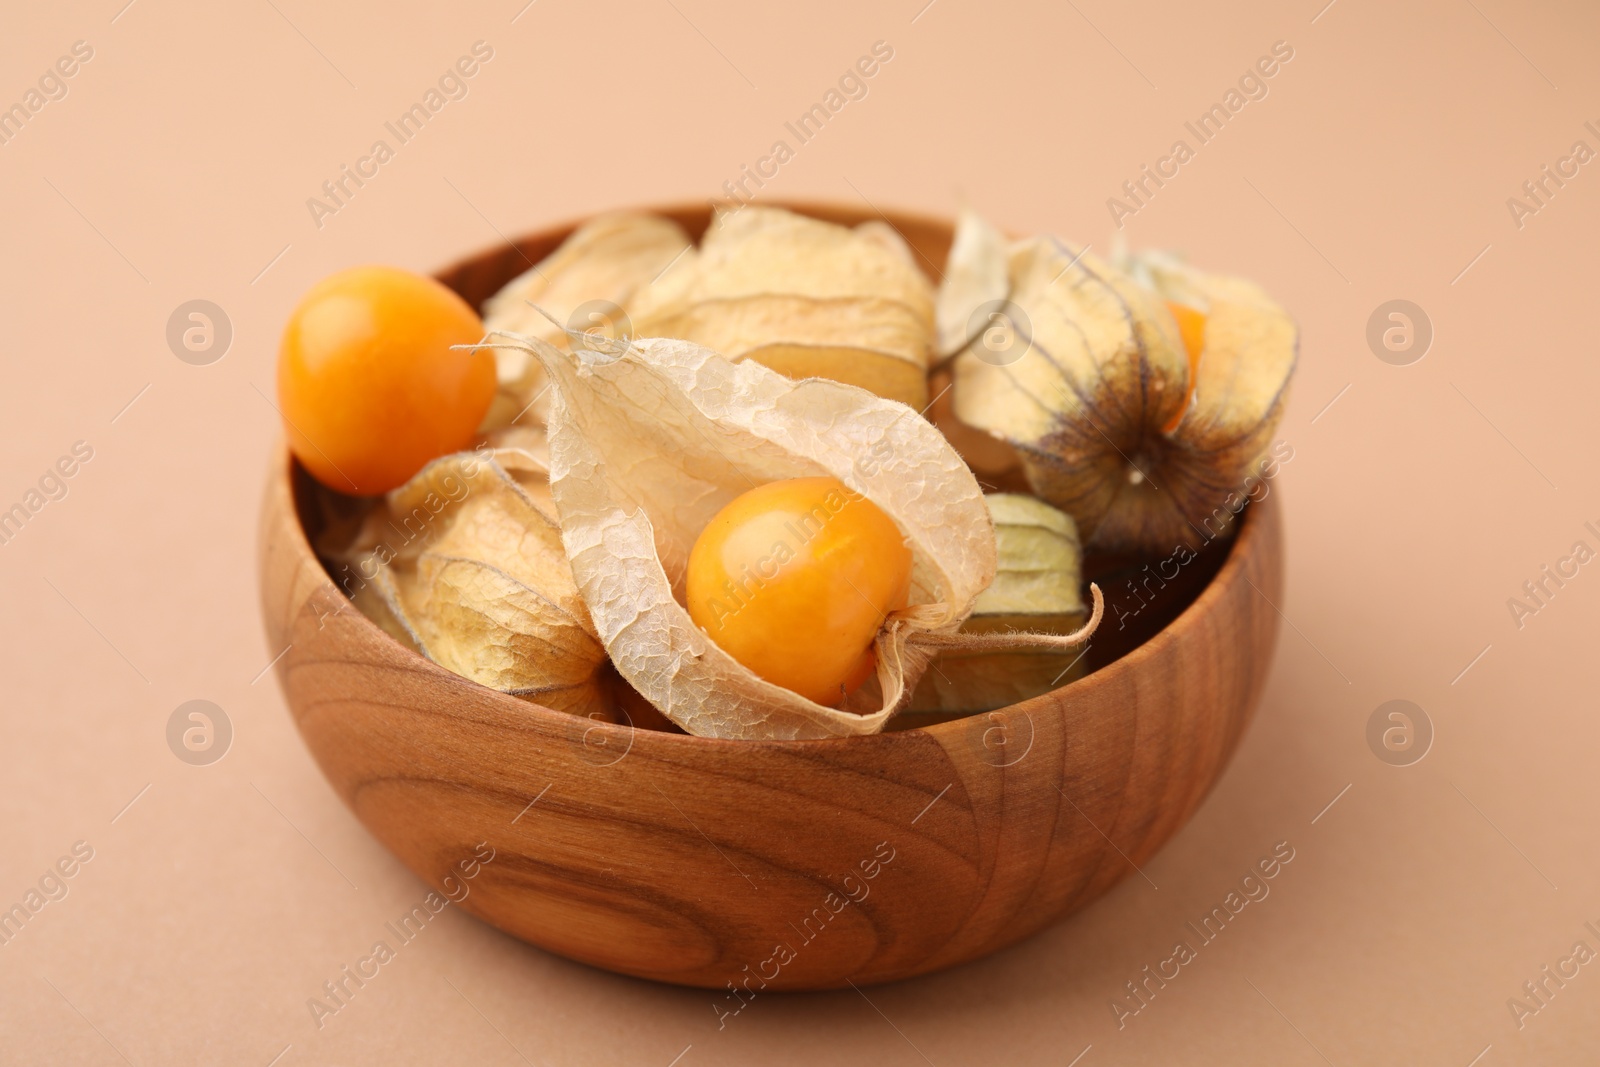 Photo of Ripe physalis fruits with calyxes in bowl on beige background, closeup